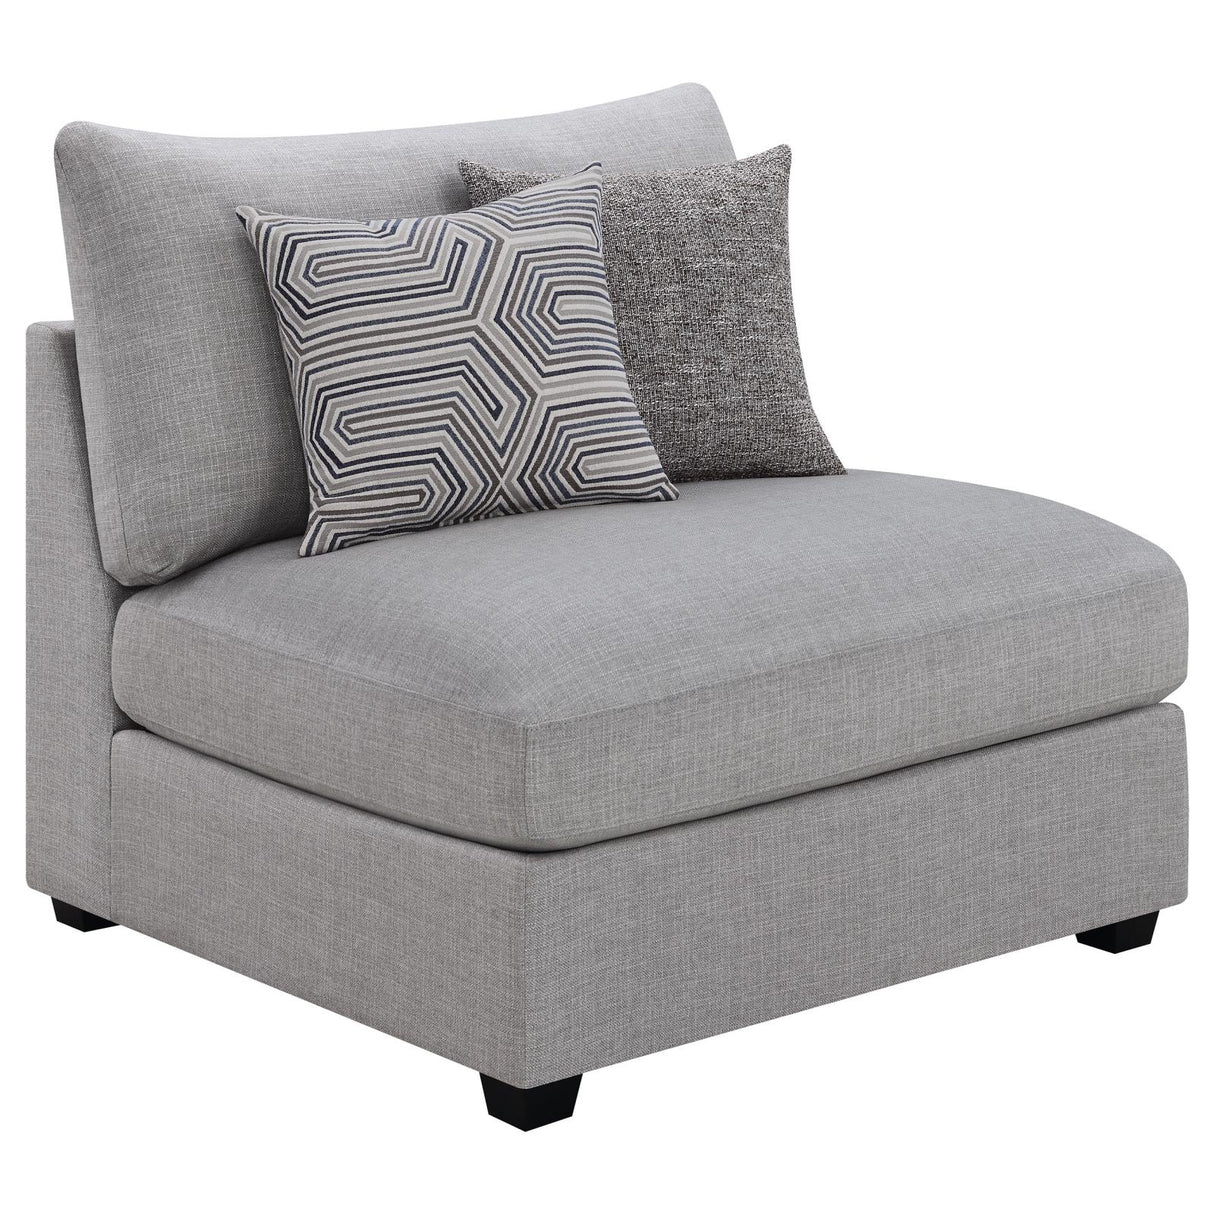 Cambria 5-piece Upholstered Modular Sectional Grey - 551511-S5A - Luna Furniture